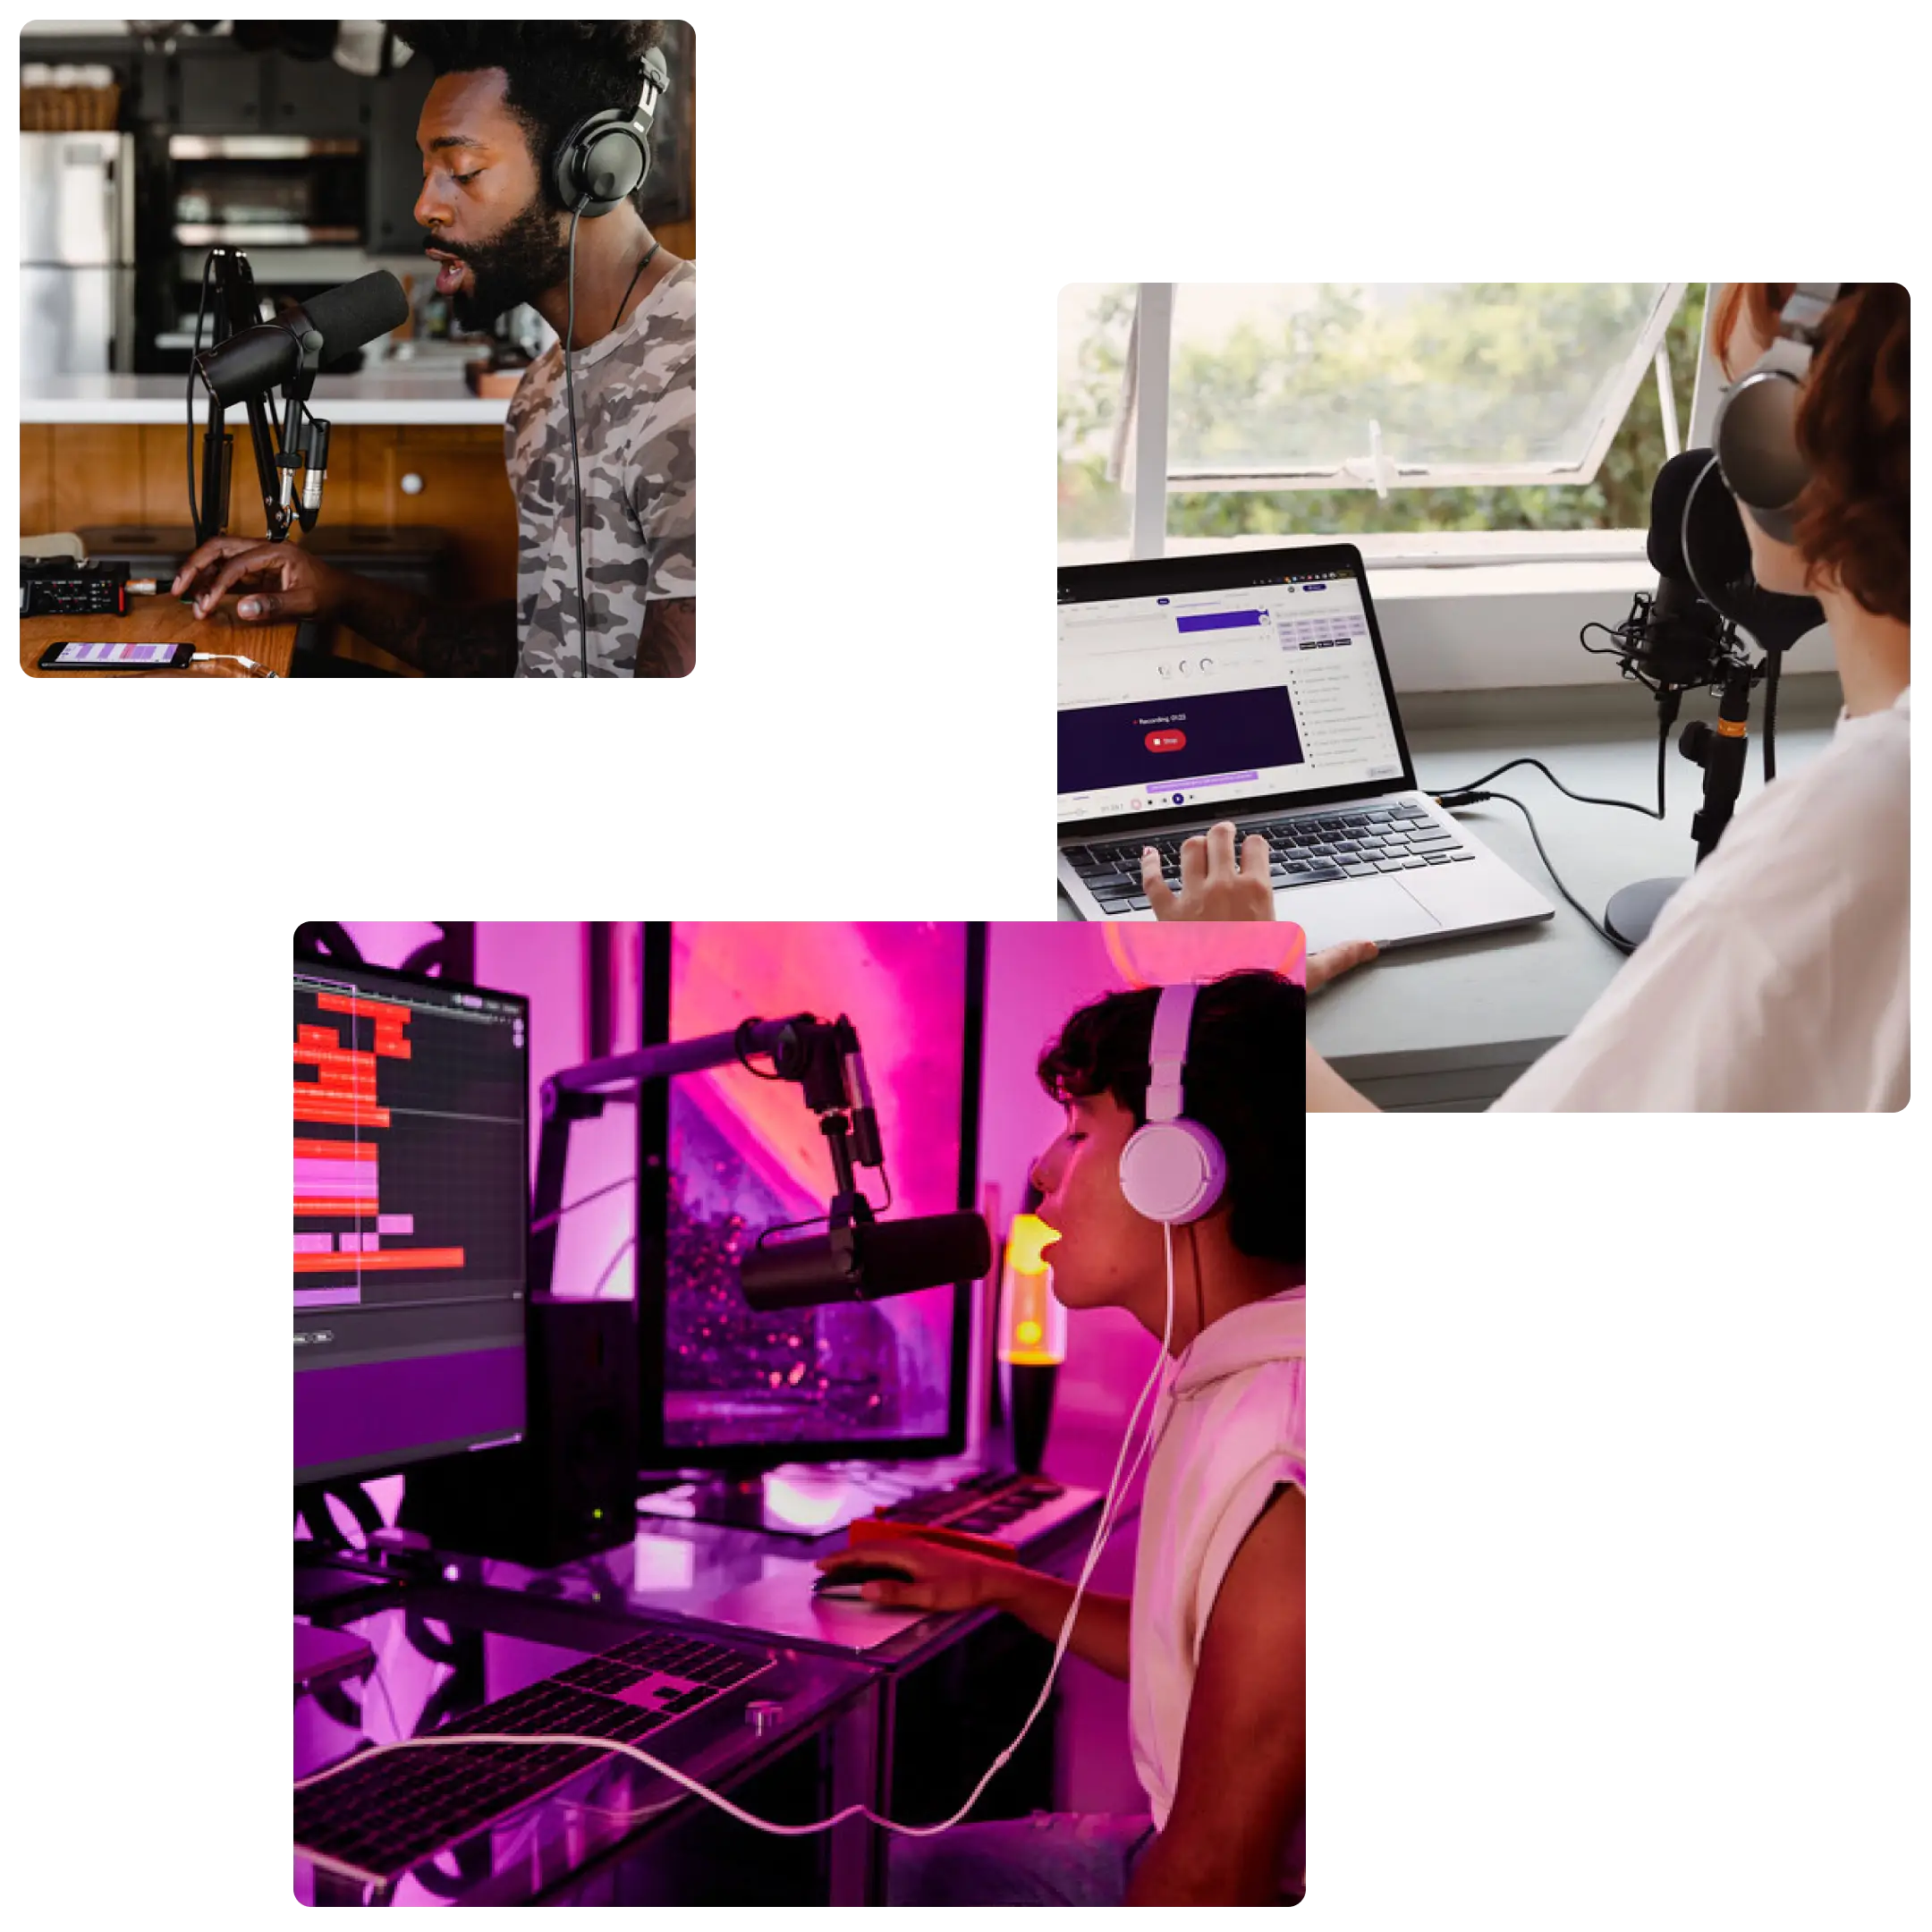 Three different images, each showing someone singing or speaking into a microphone with headphones on. In two of the images, the person is looking at the Soundtrap Studio.